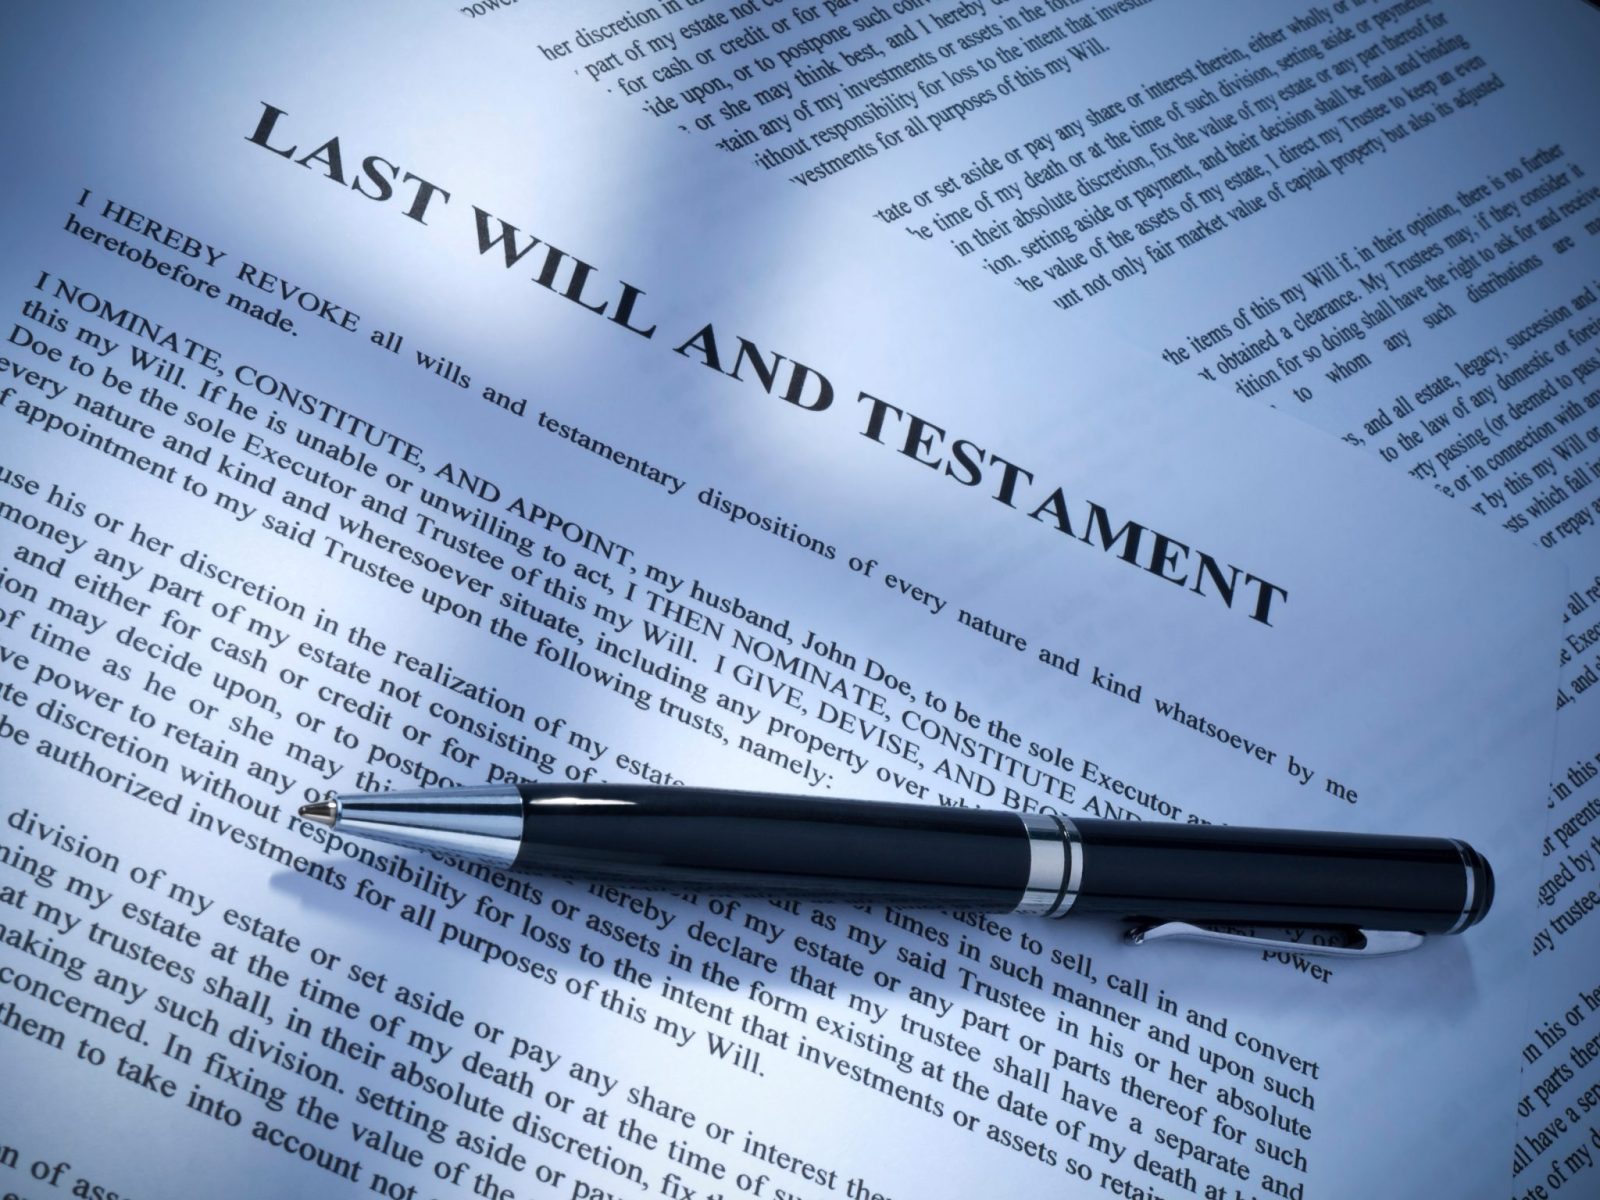 I’ve Been Named the Executor of a Relative’s Will in Indiana. Now What?